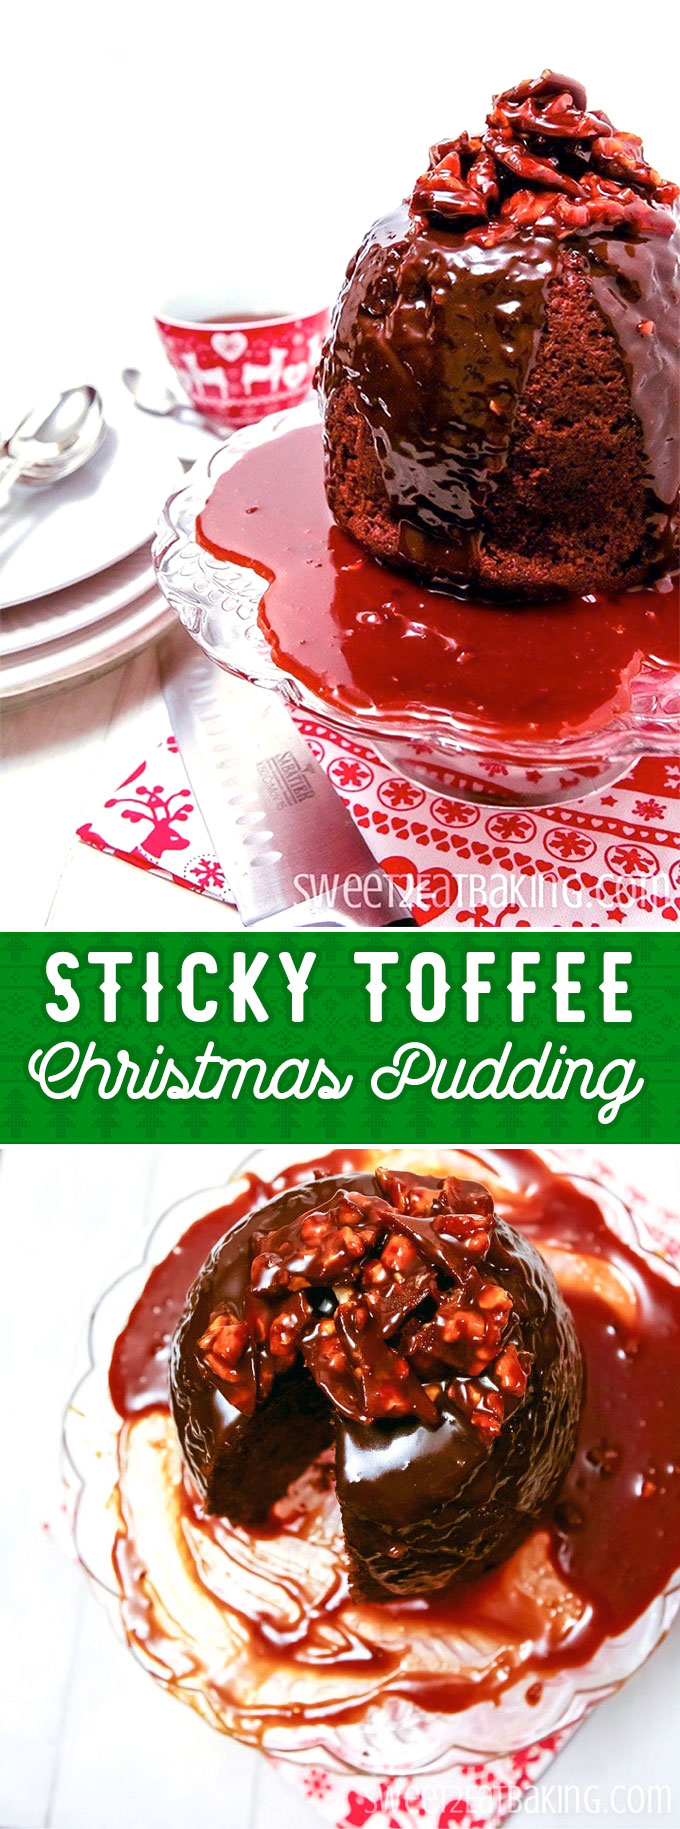 Sticky Toffee Christmas Pudding Recipe by Sweet2EatBaking.com | 